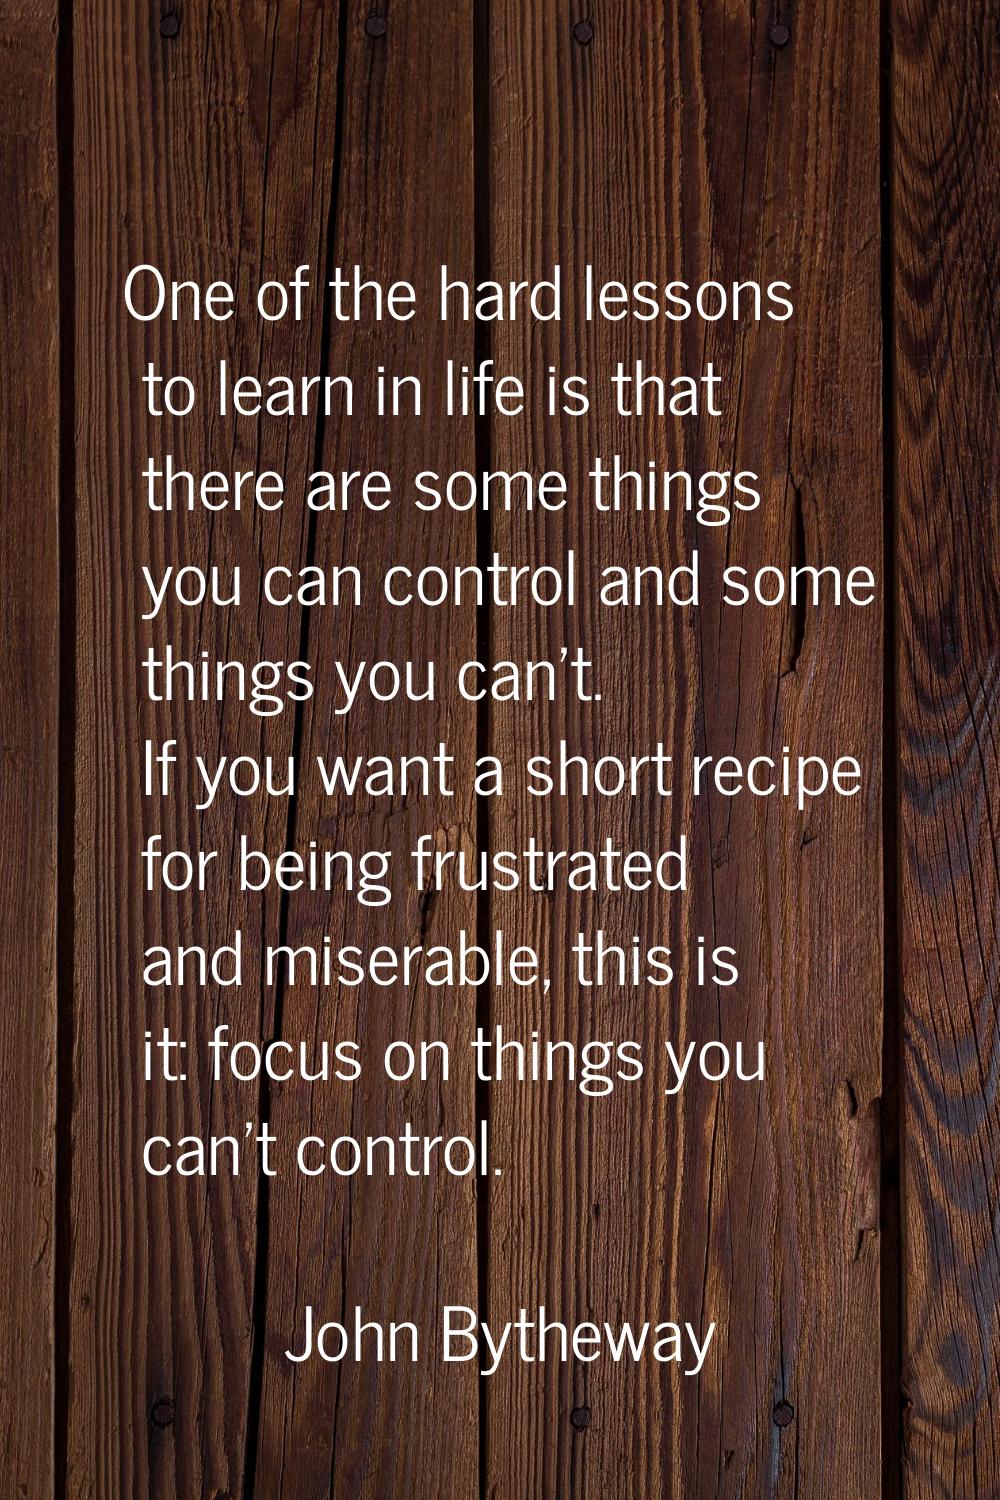 One of the hard lessons to learn in life is that there are some things you can control and some thi